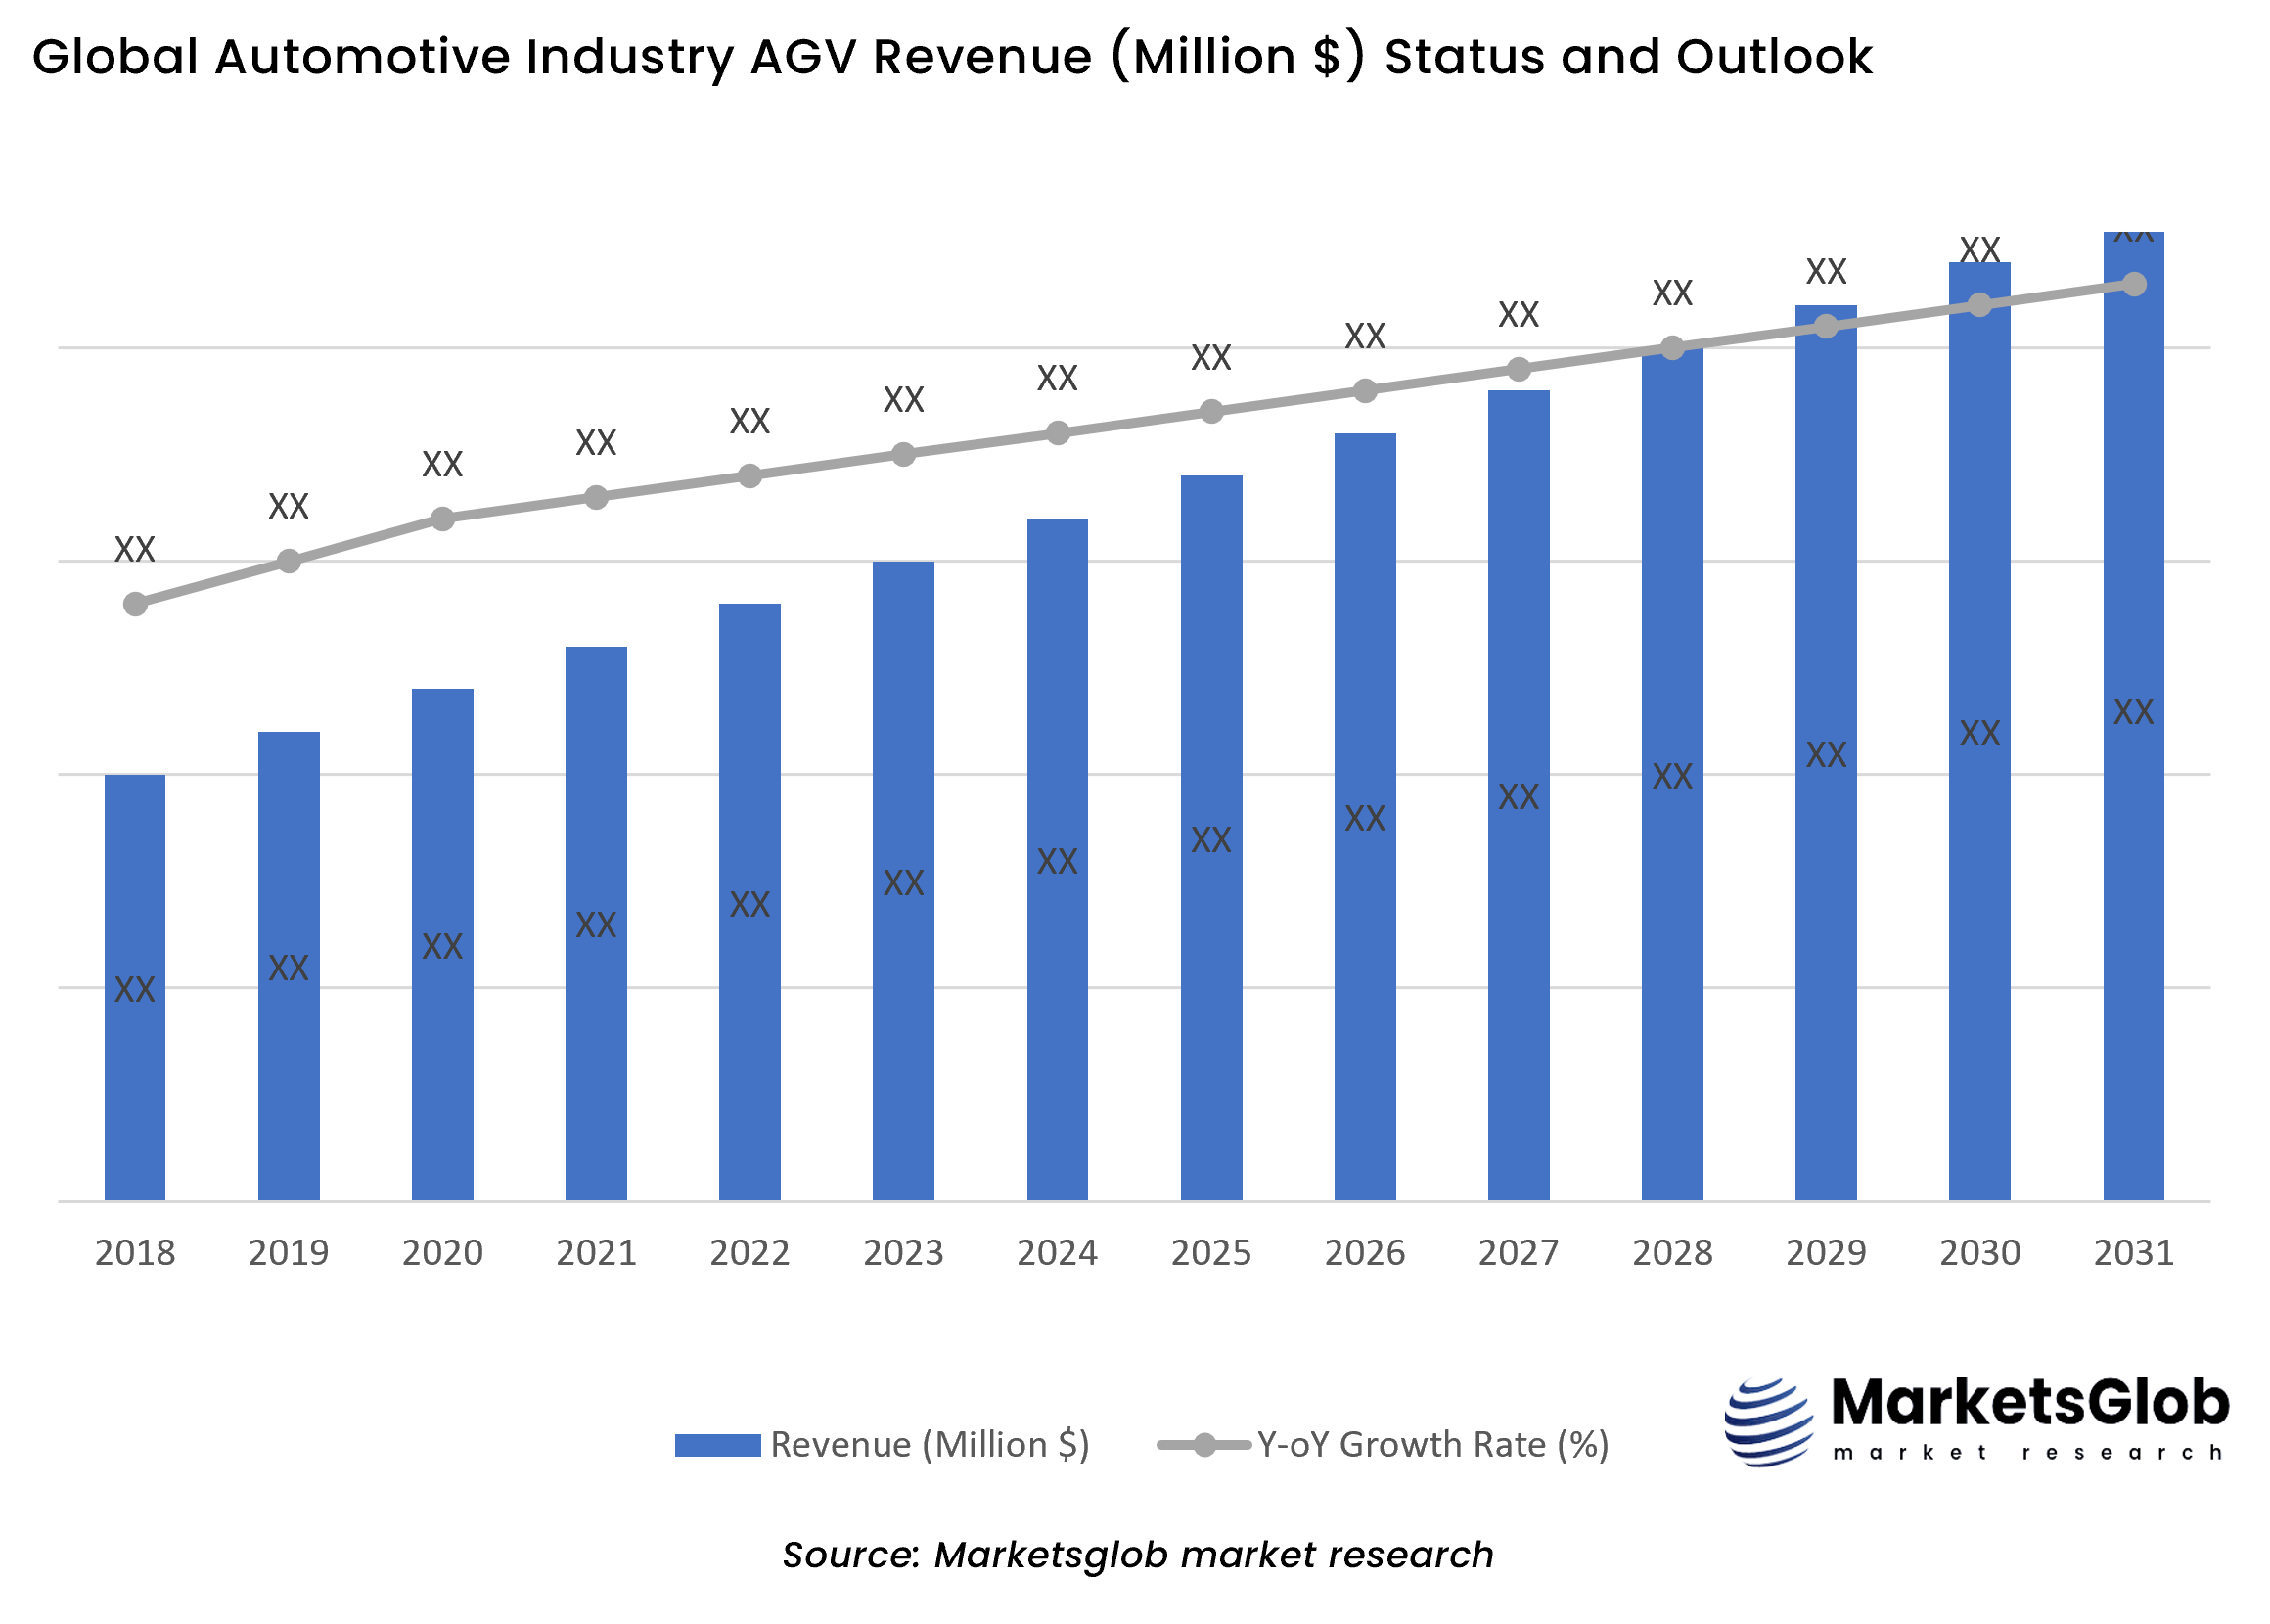 Automotive Industry AGV Status & Outlook